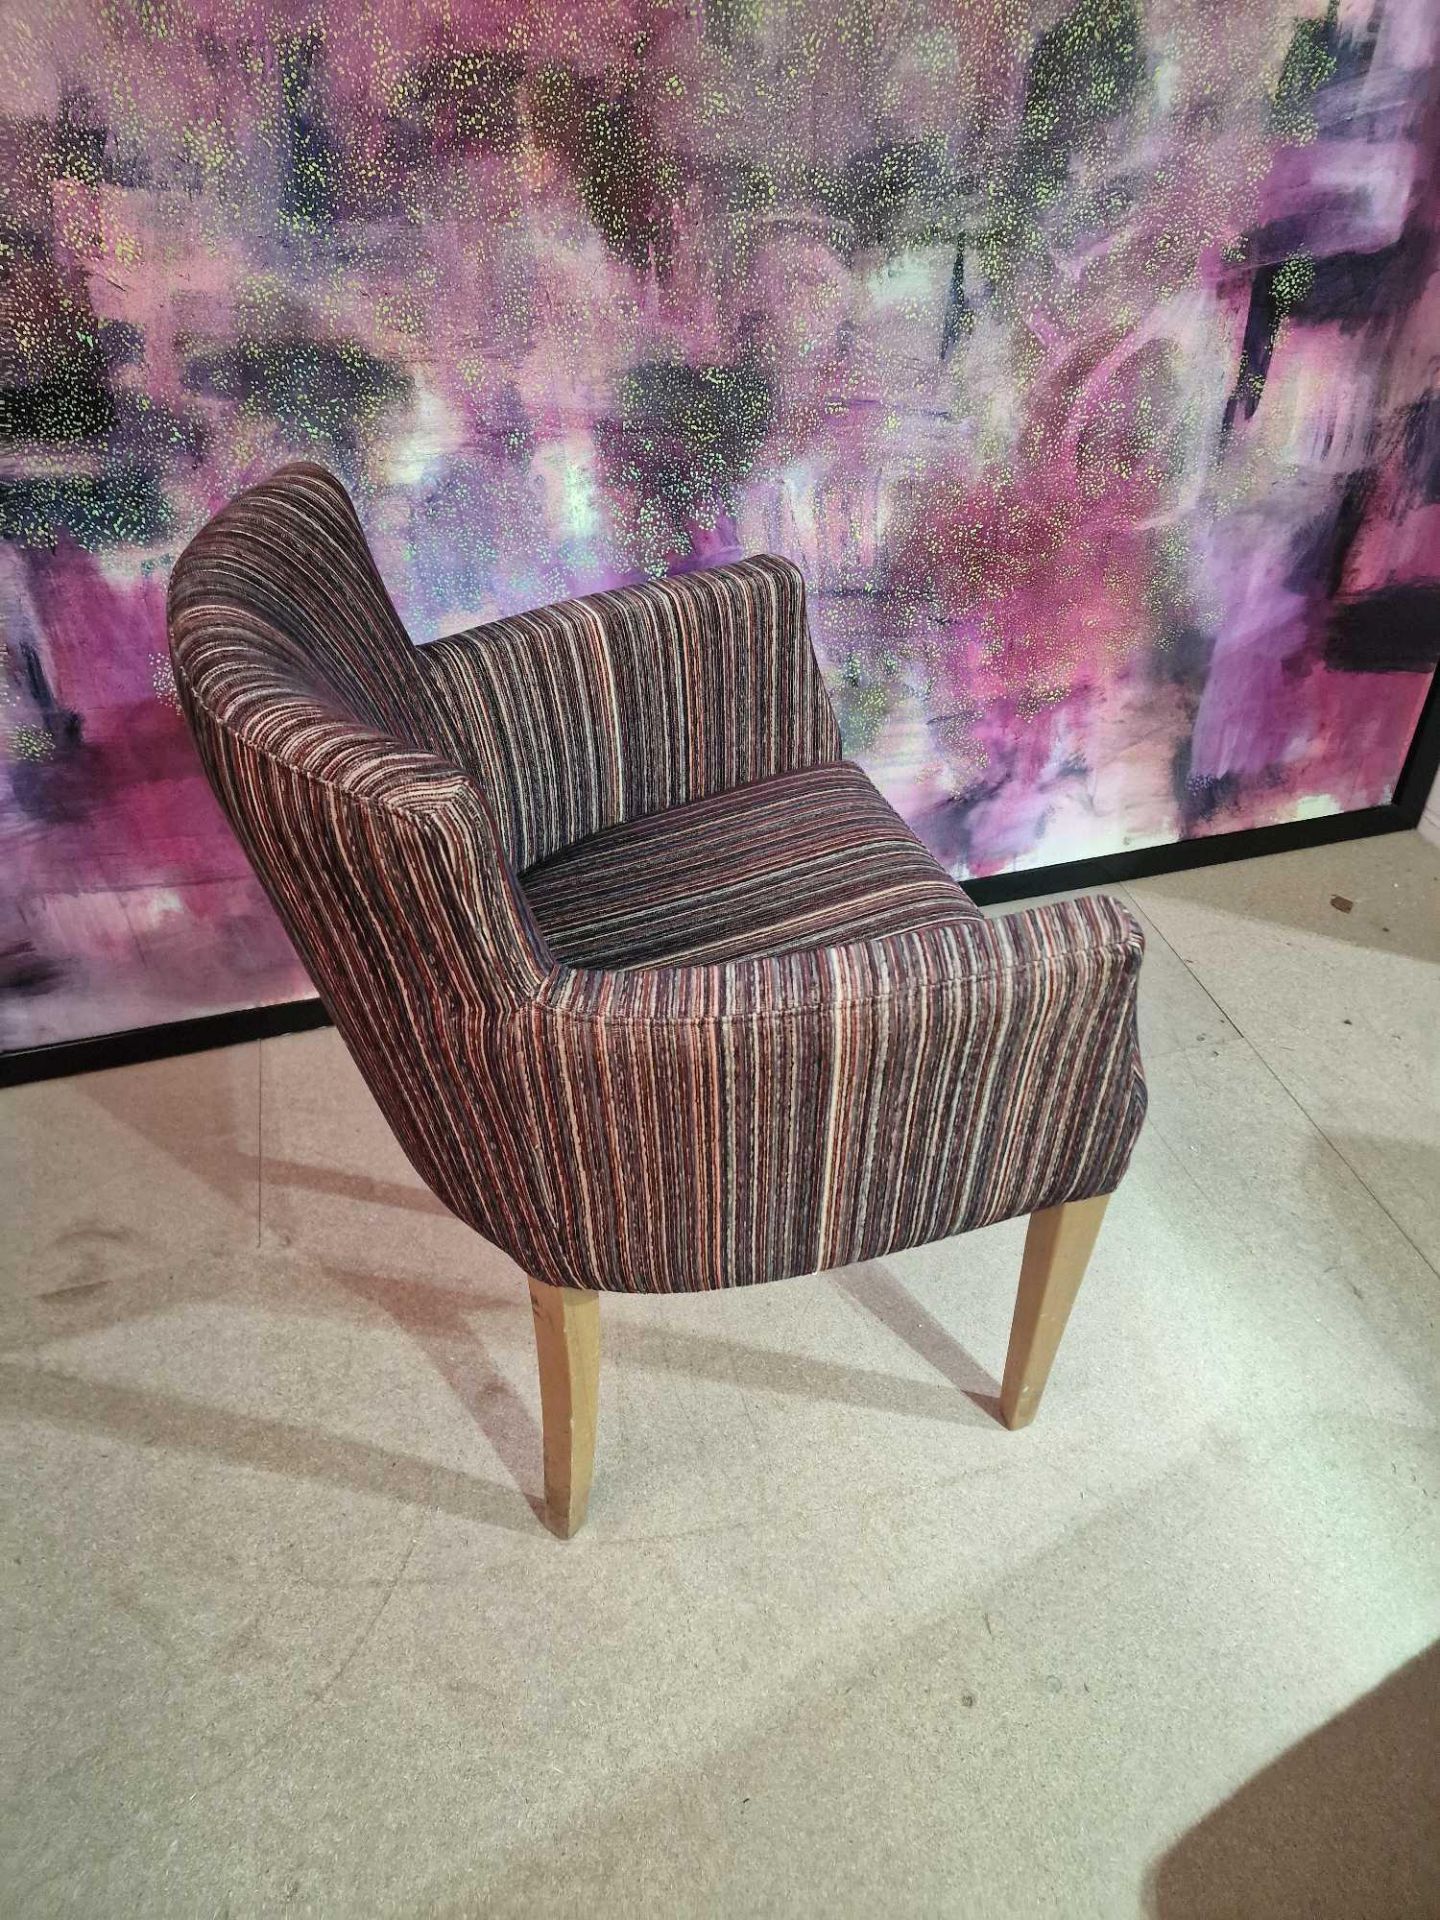 Contemporary dining chair Upholstered in a modern striped pattern fabric, the high arm rests and - Image 3 of 3